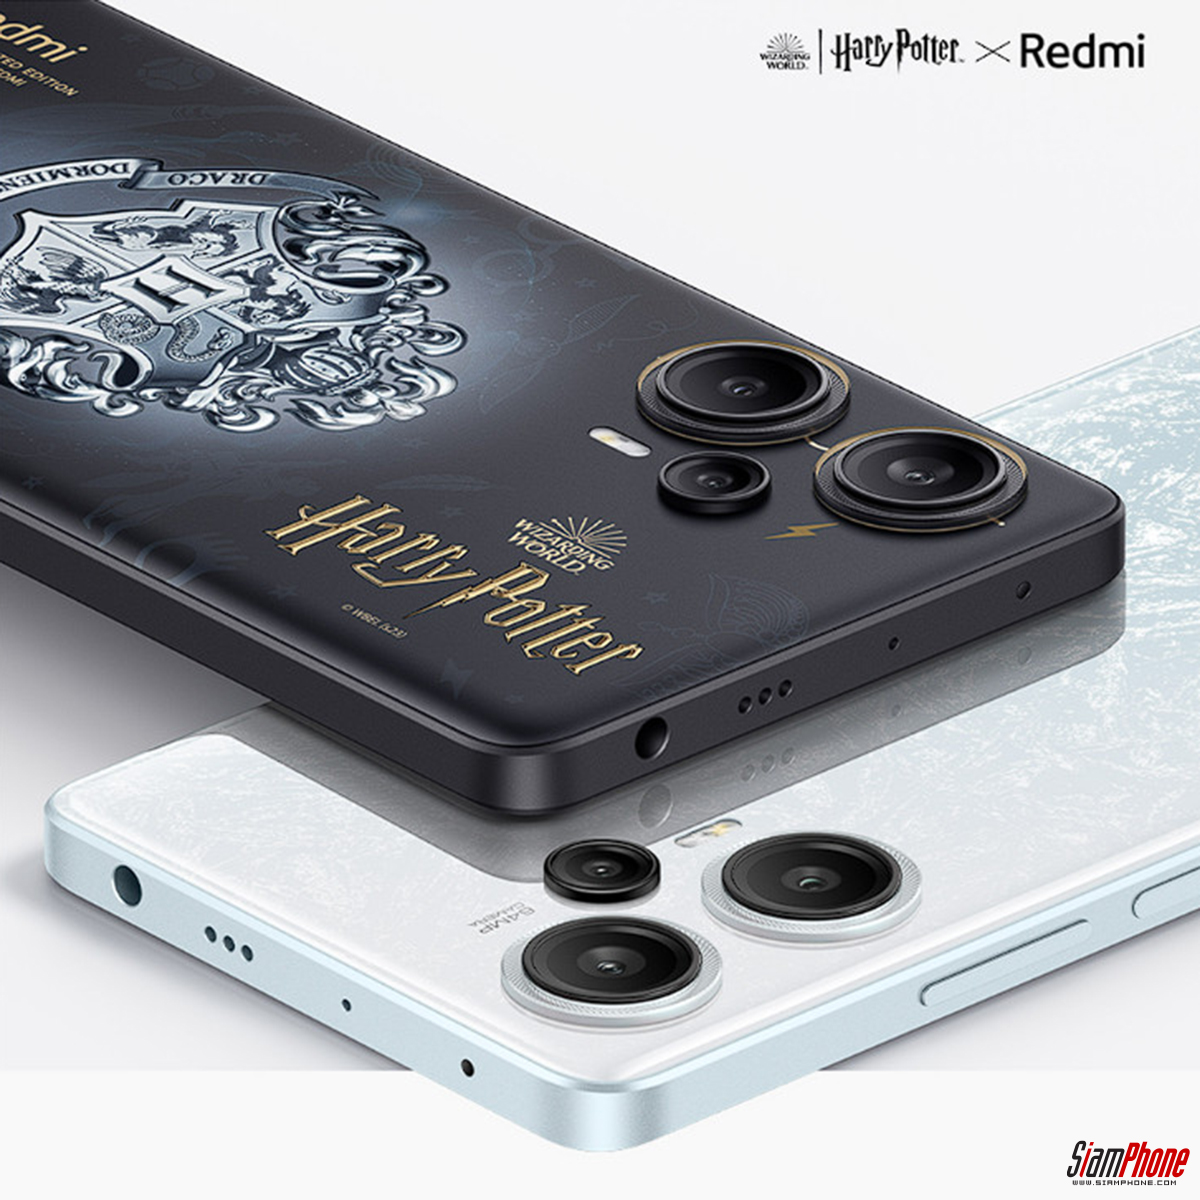 Redmi Note 12 Turbo powered by Snapdragon 7+ Gen 2 has a special edition Harry Potter Edition.